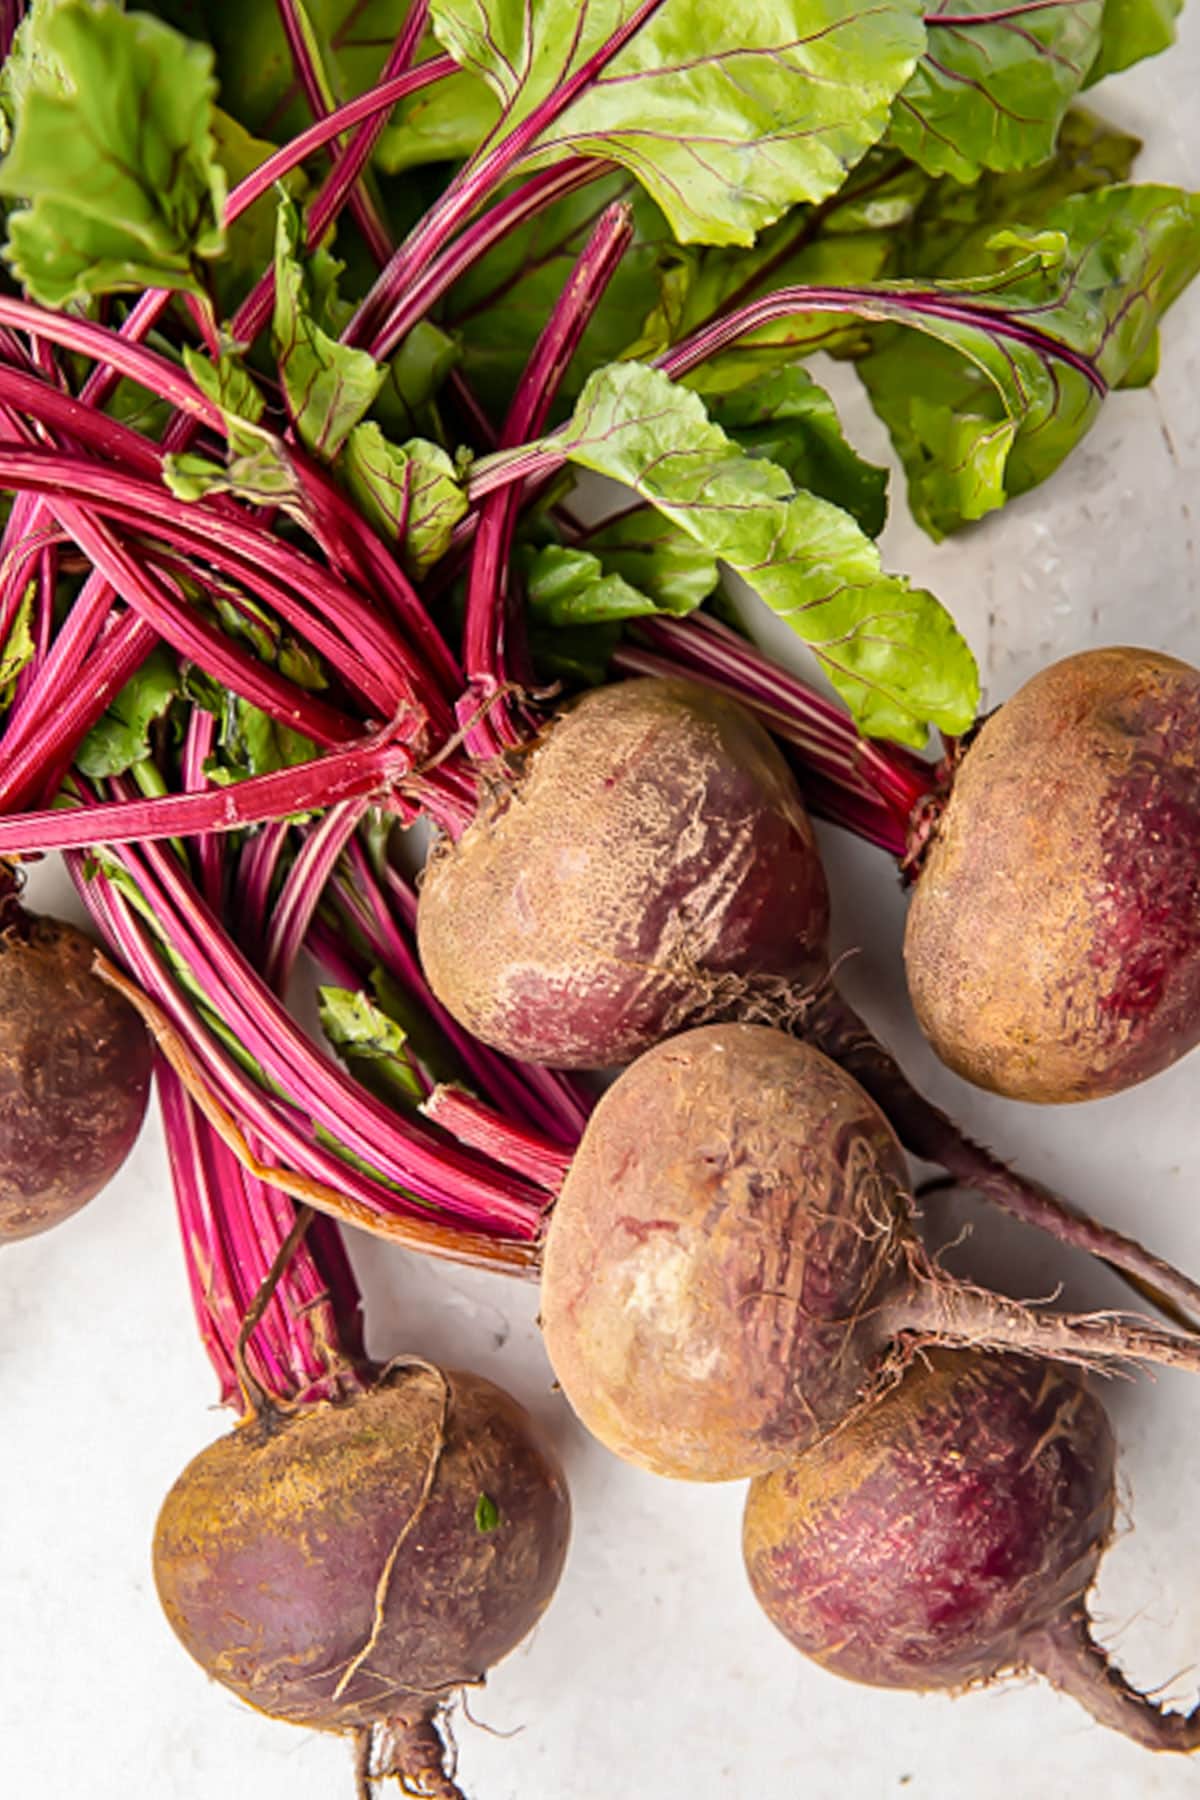 Fresh beets with stems and leaves attached.